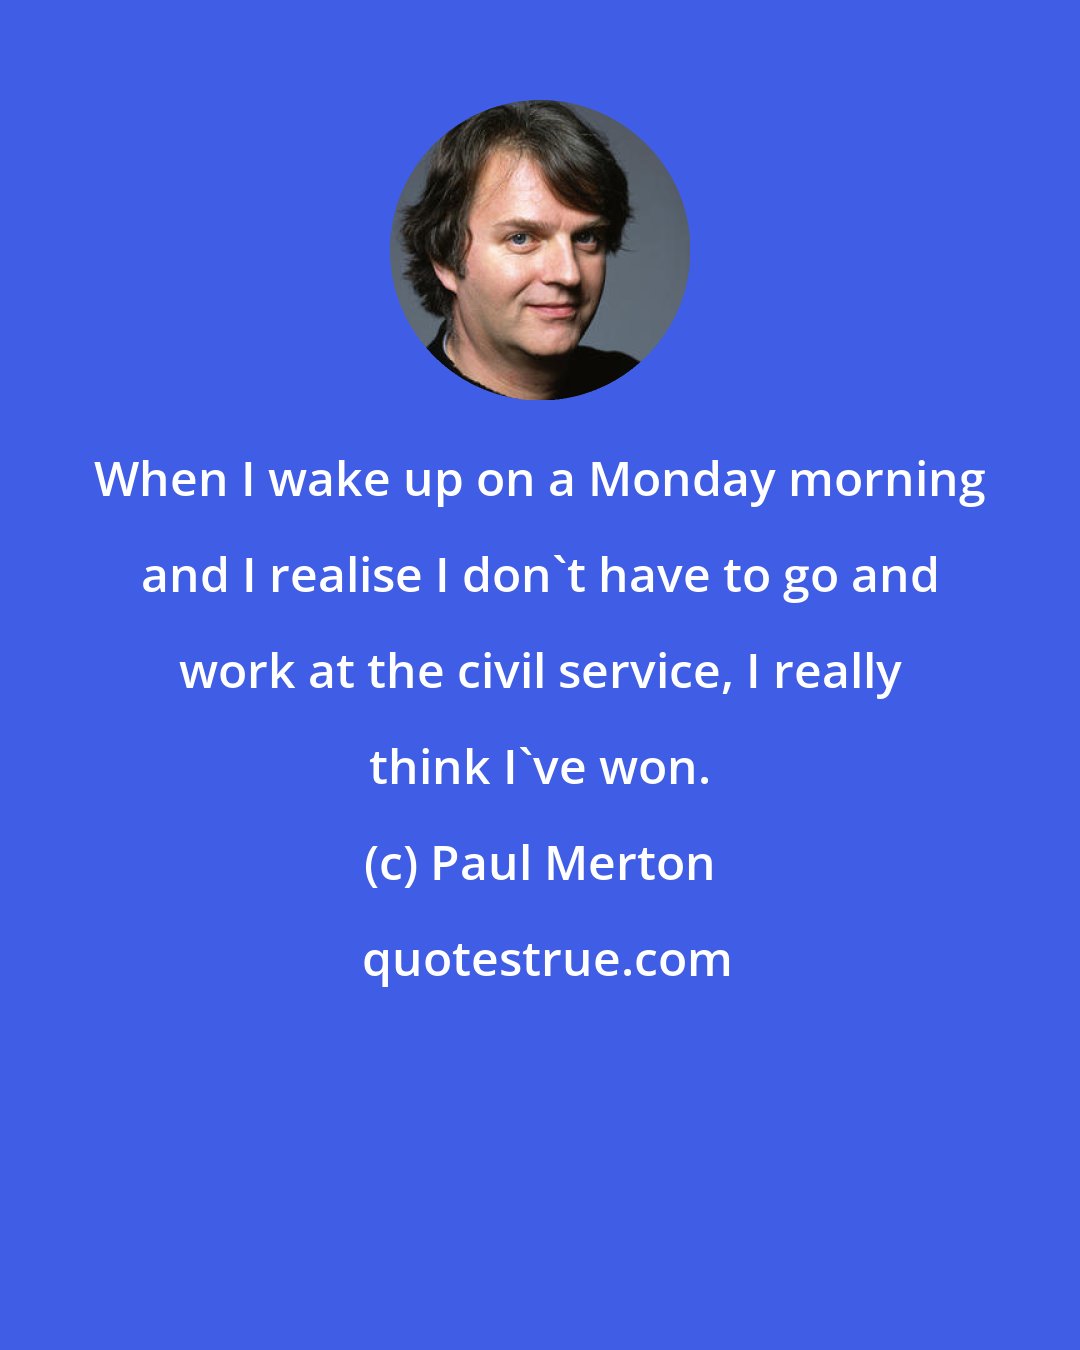 Paul Merton: When I wake up on a Monday morning and I realise I don't have to go and work at the civil service, I really think I've won.